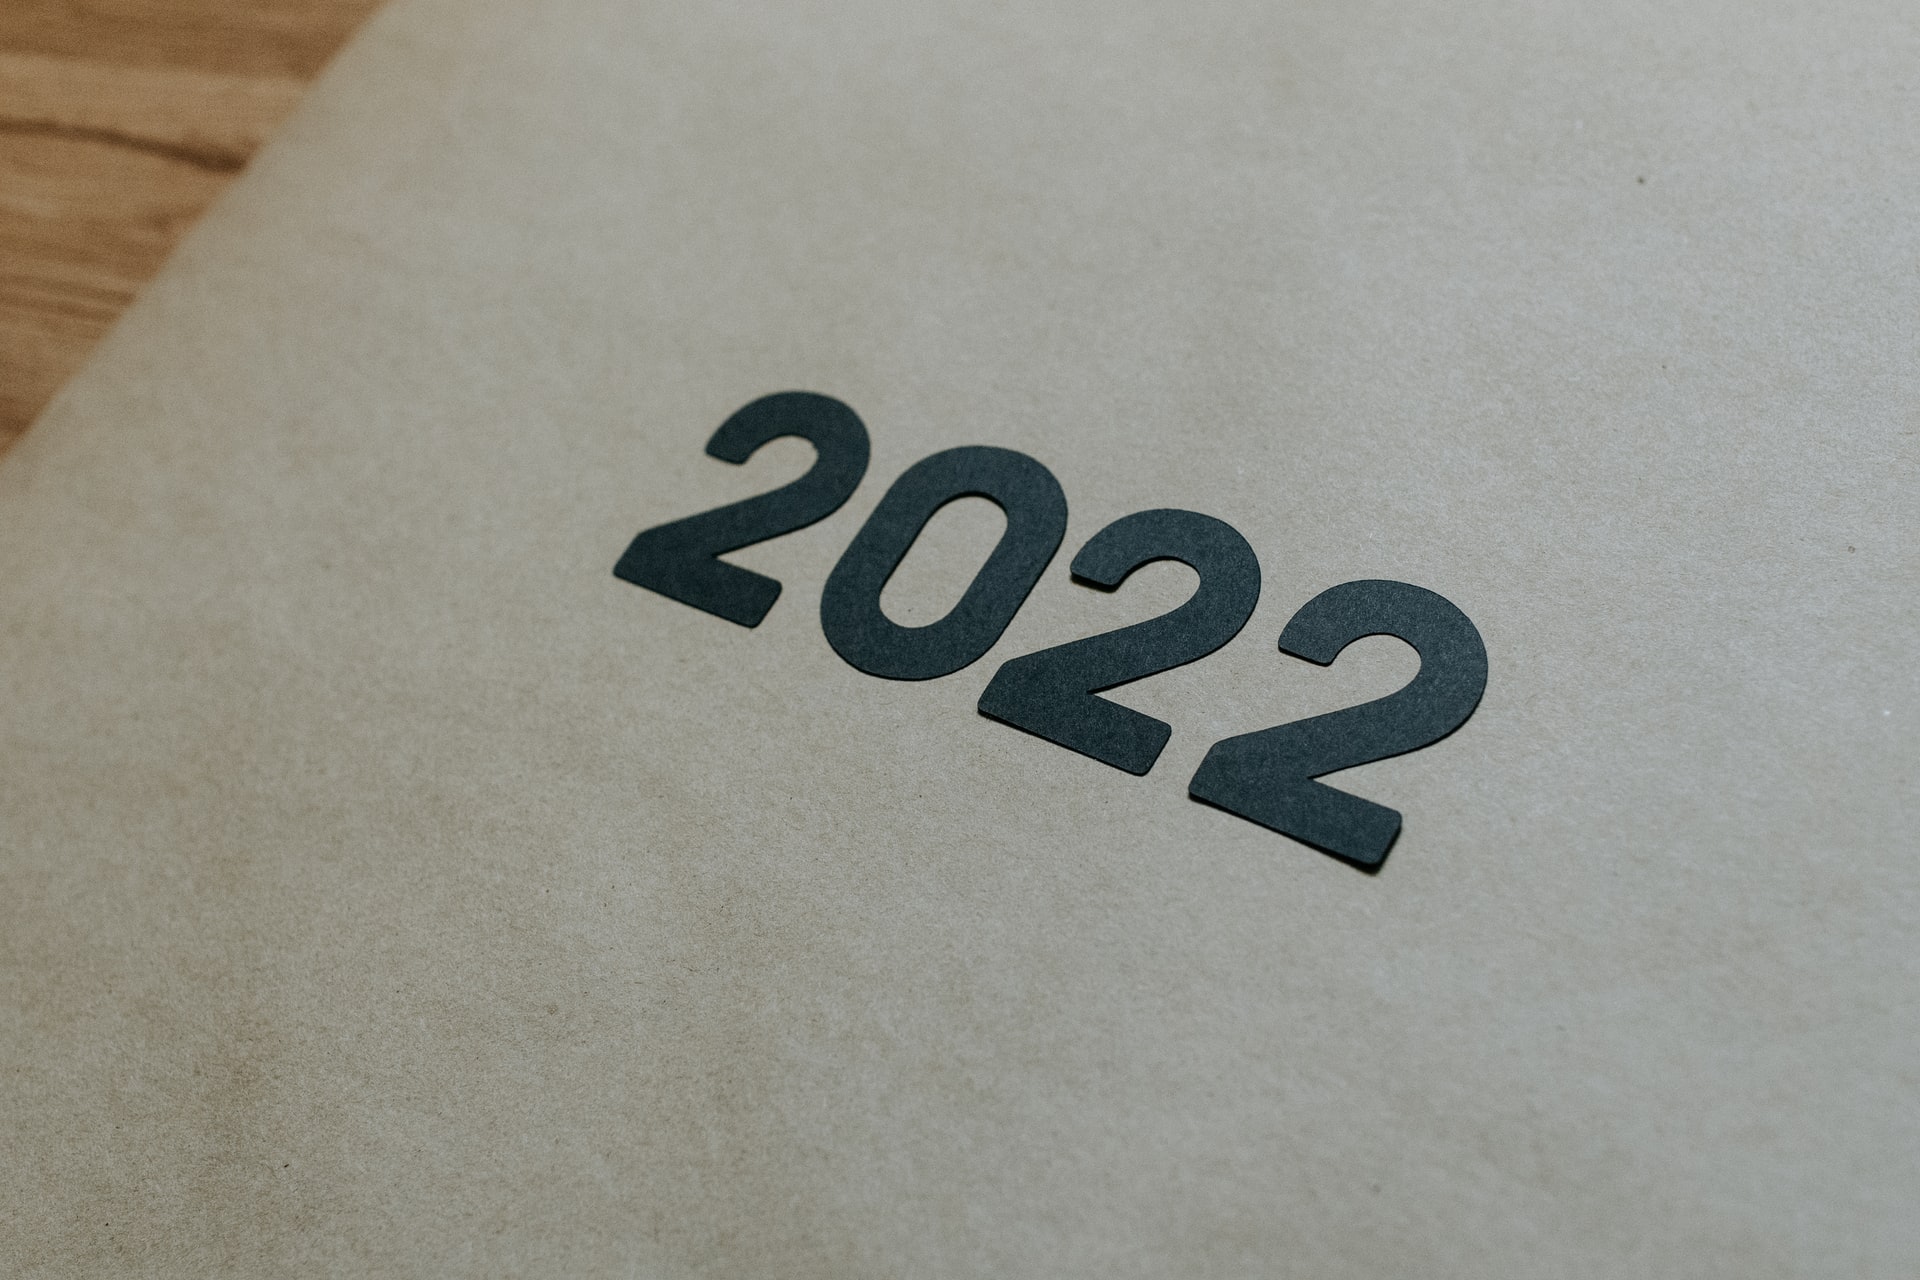 A photo of a piece of paper with 2022 printed on it in grey.